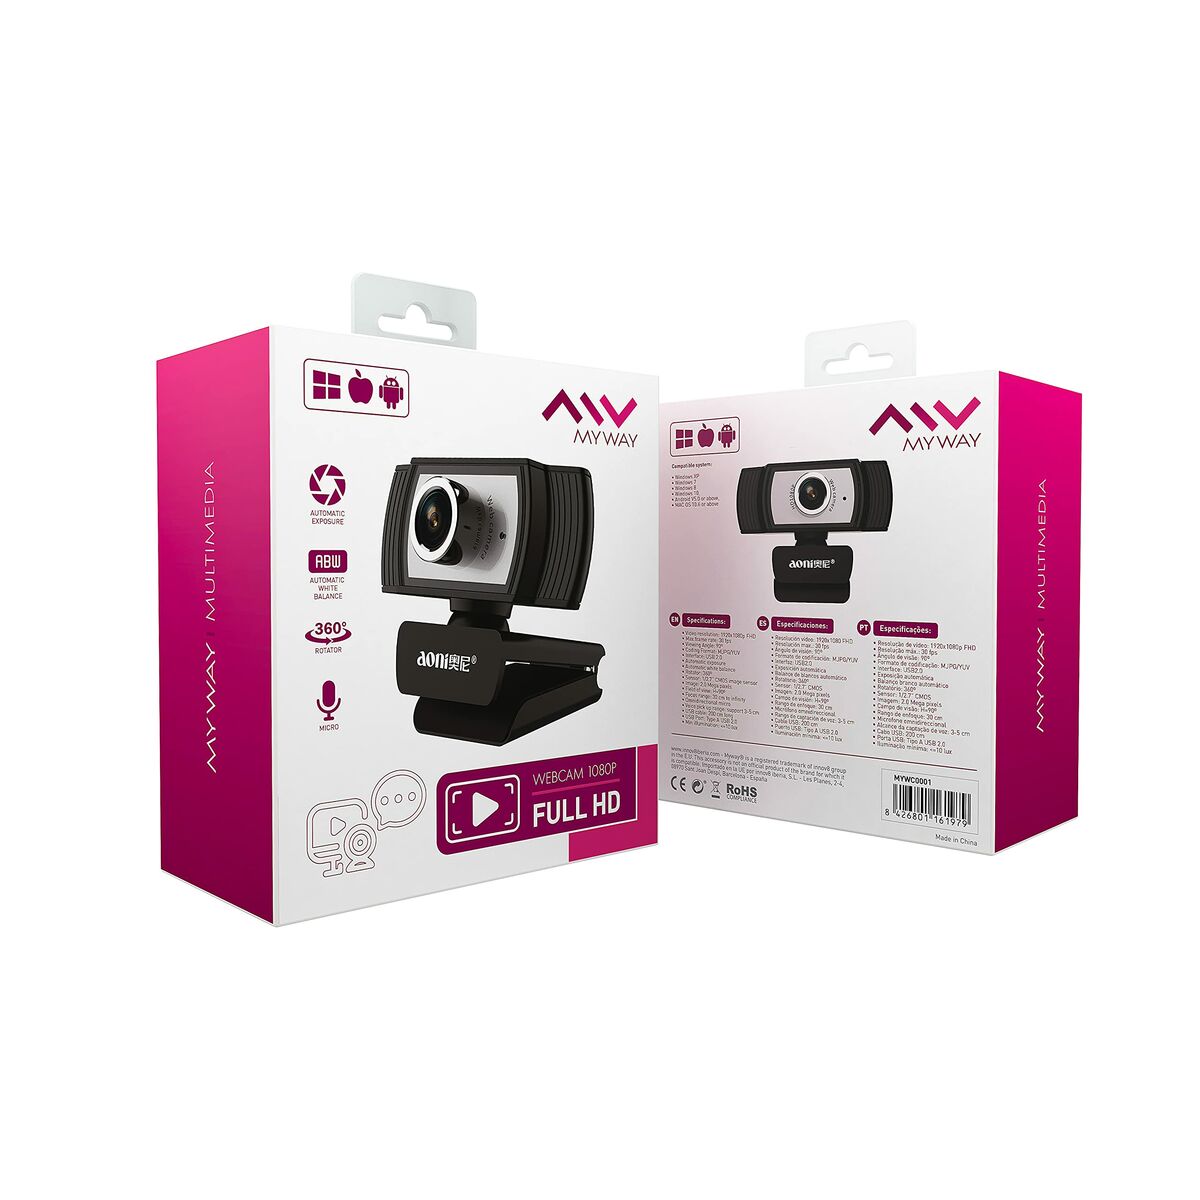 Webcam Myway A229, Myway, Computing, Accessories, webcam-myway-a229, :Webcam, Brand_Myway, category-reference-2609, category-reference-2642, category-reference-2844, category-reference-t-19685, category-reference-t-19908, category-reference-t-21340, computers / peripherals, Condition_NEW, office, Price_50 - 100, RiotNook